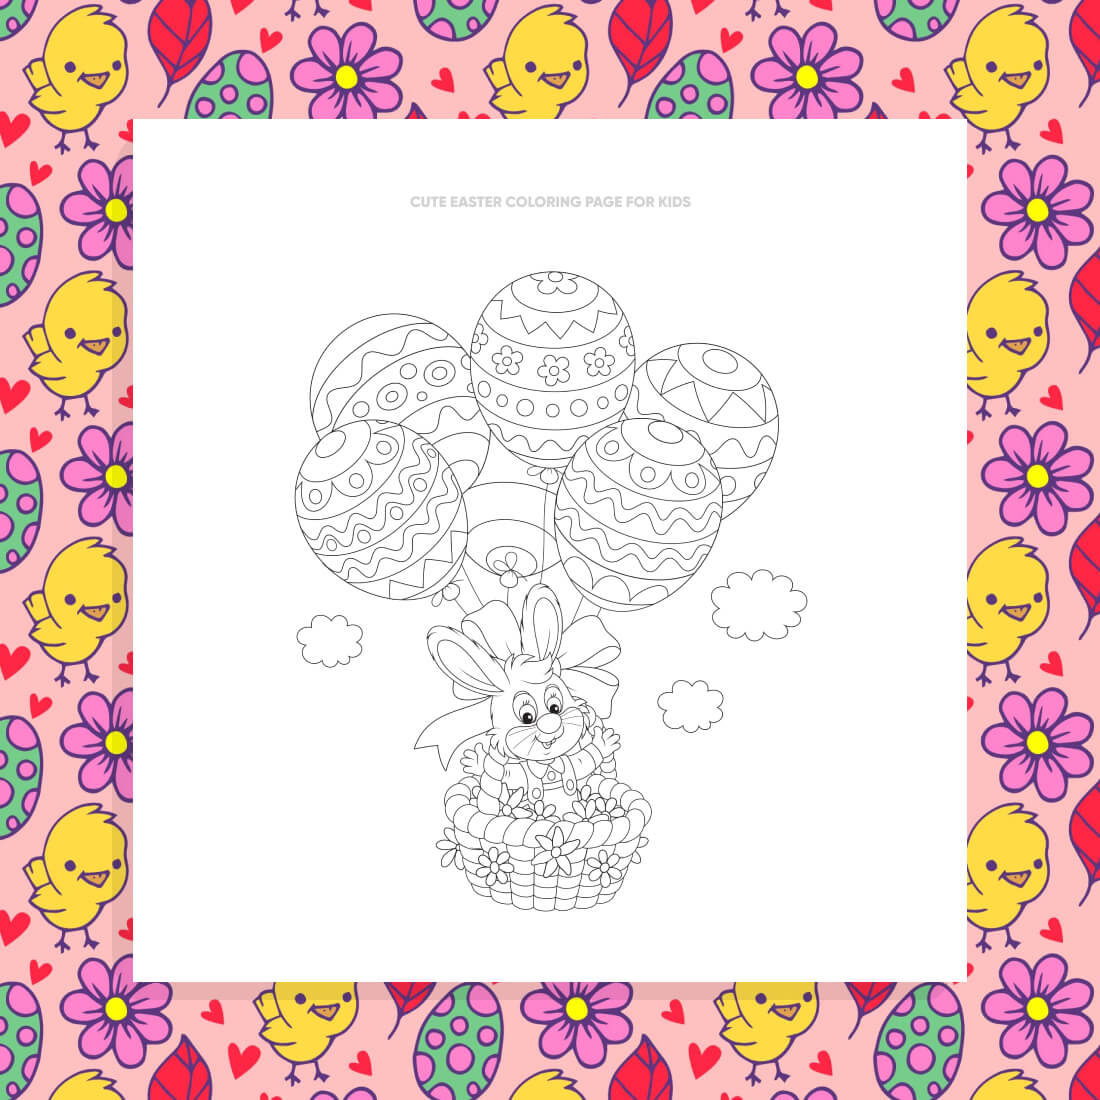 02. cute easter coloring page for kids 1100 x 1100